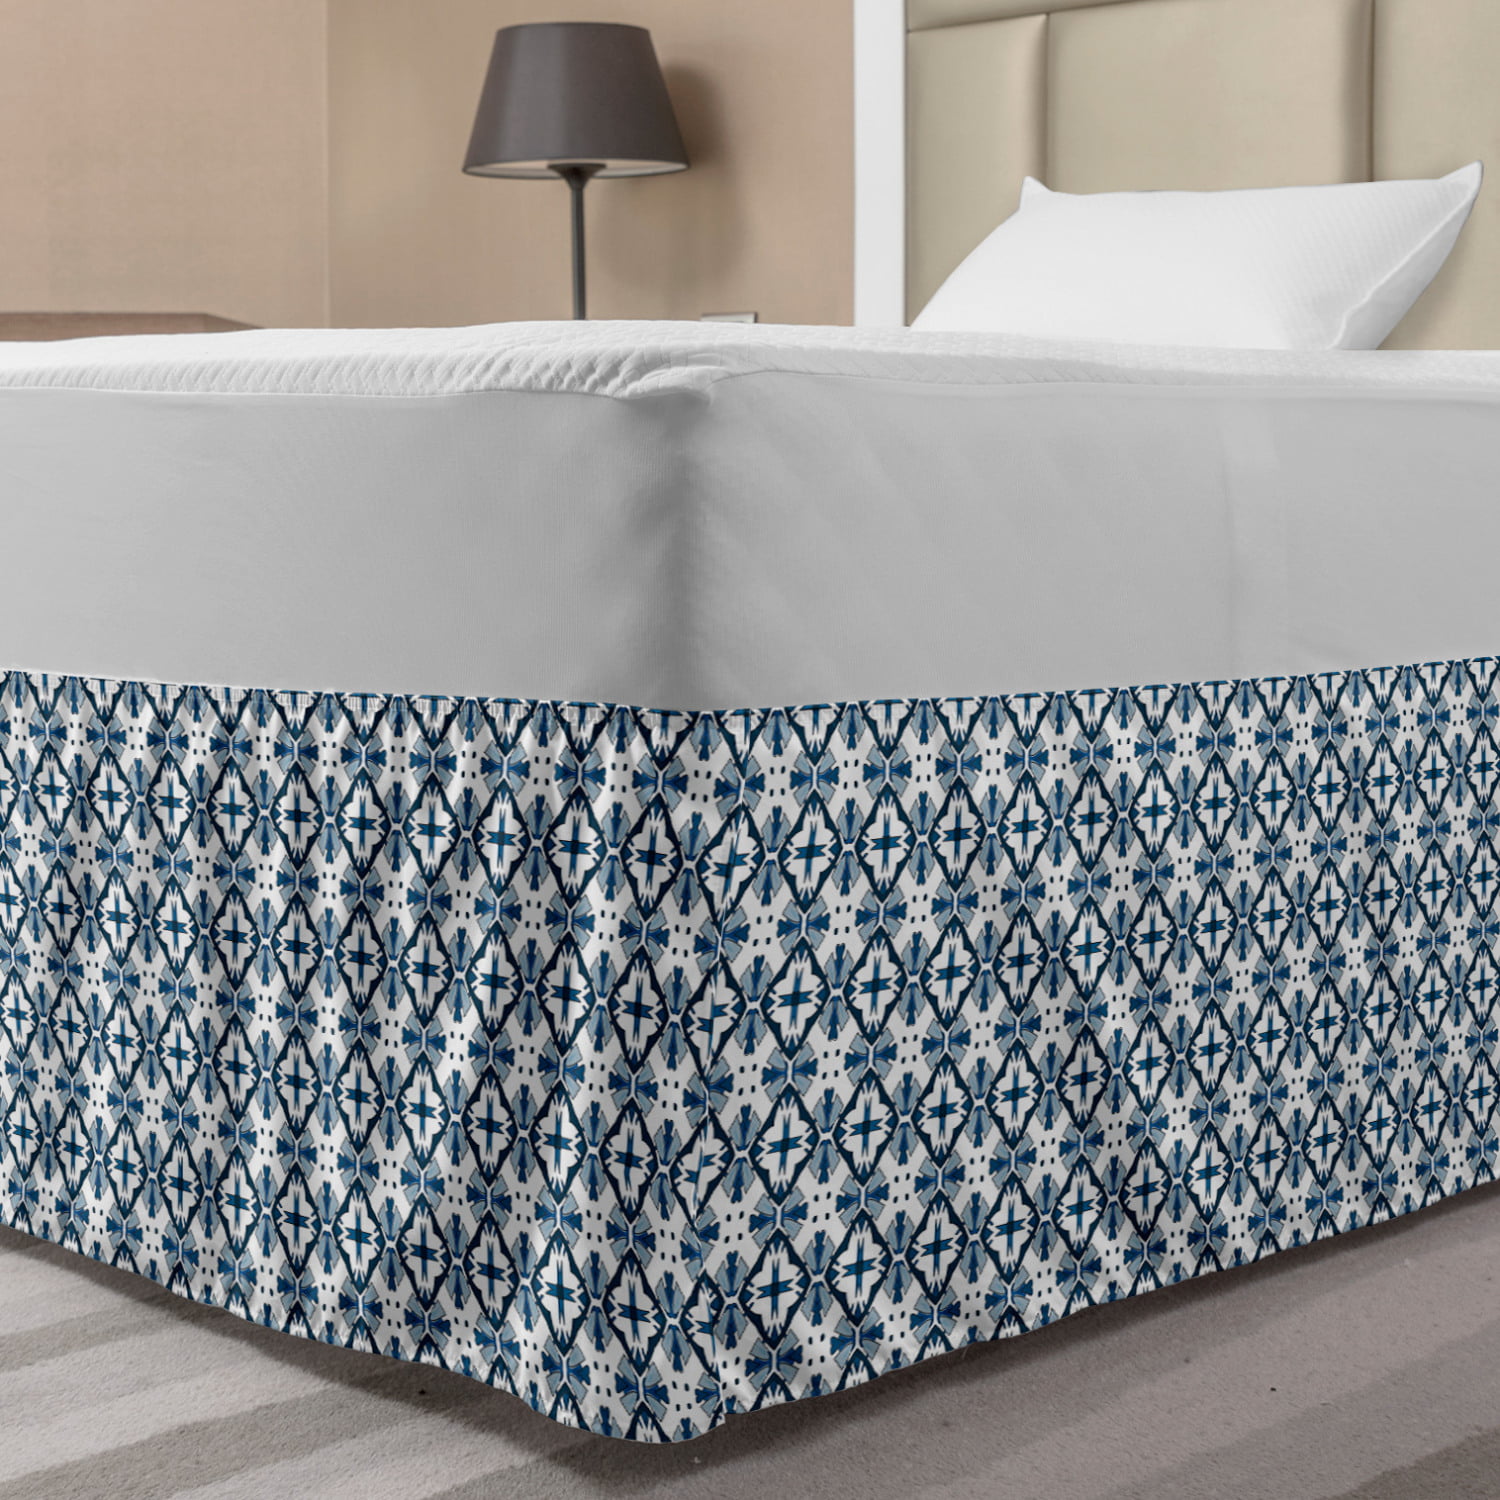 Blue and White Bed Skirt, Traditional Portuguese Azulejo Tiles Pattern ...